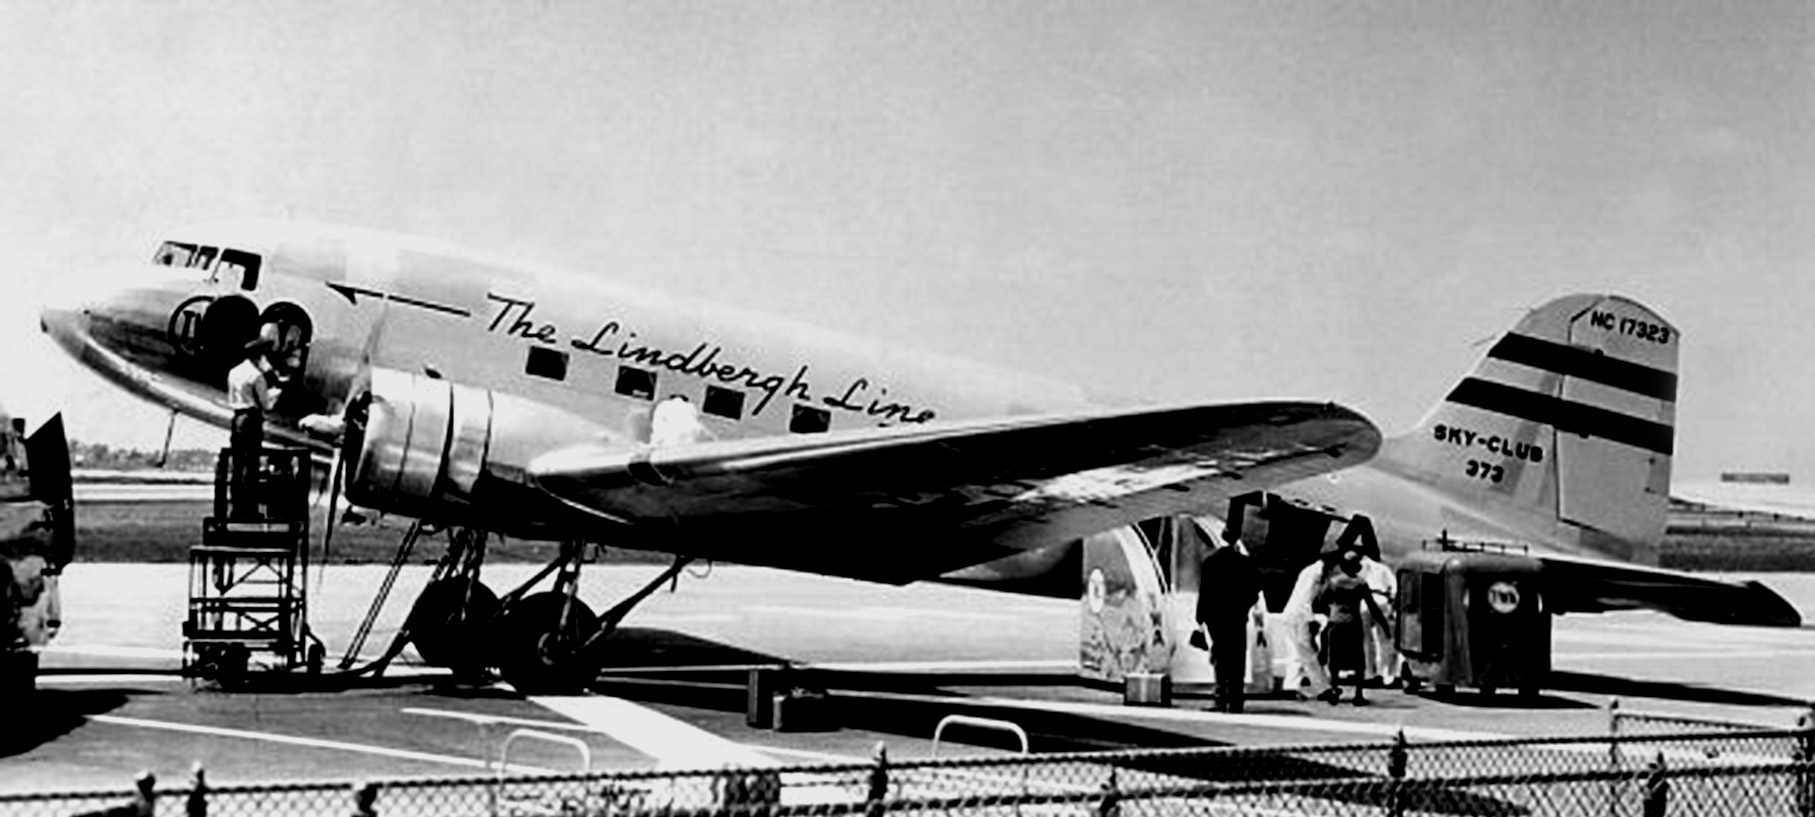 The TWA DC-3 Sky Club shown is identical to the ship that crashed into Mt. Potosi, Nevada January 16, 1942.